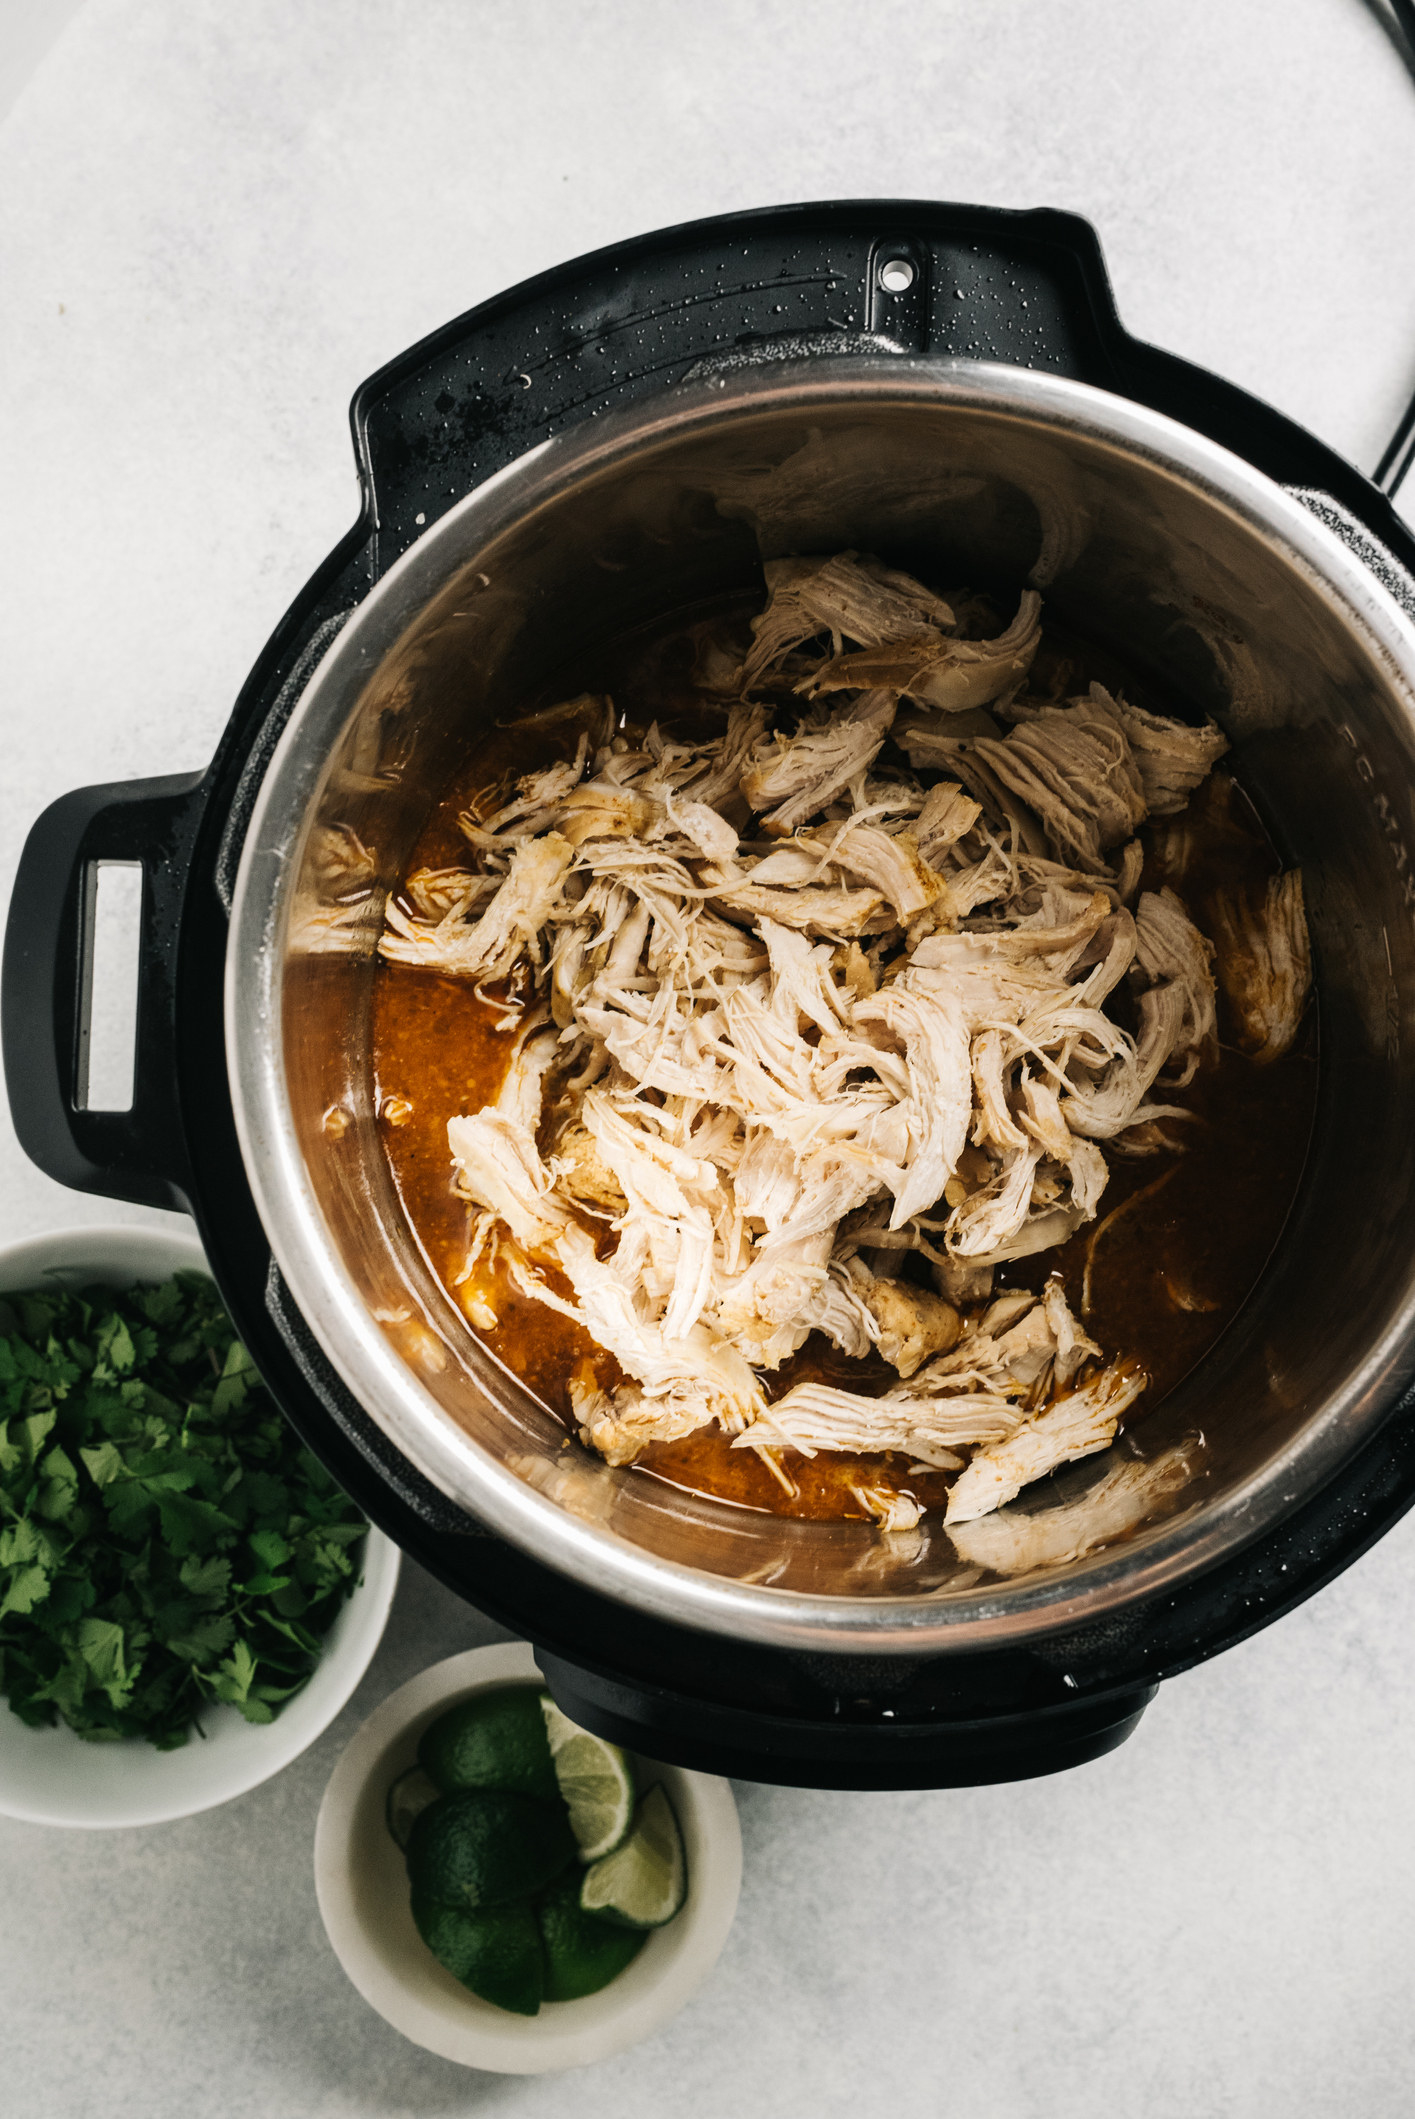 Shredded chicken in the slow cooker.